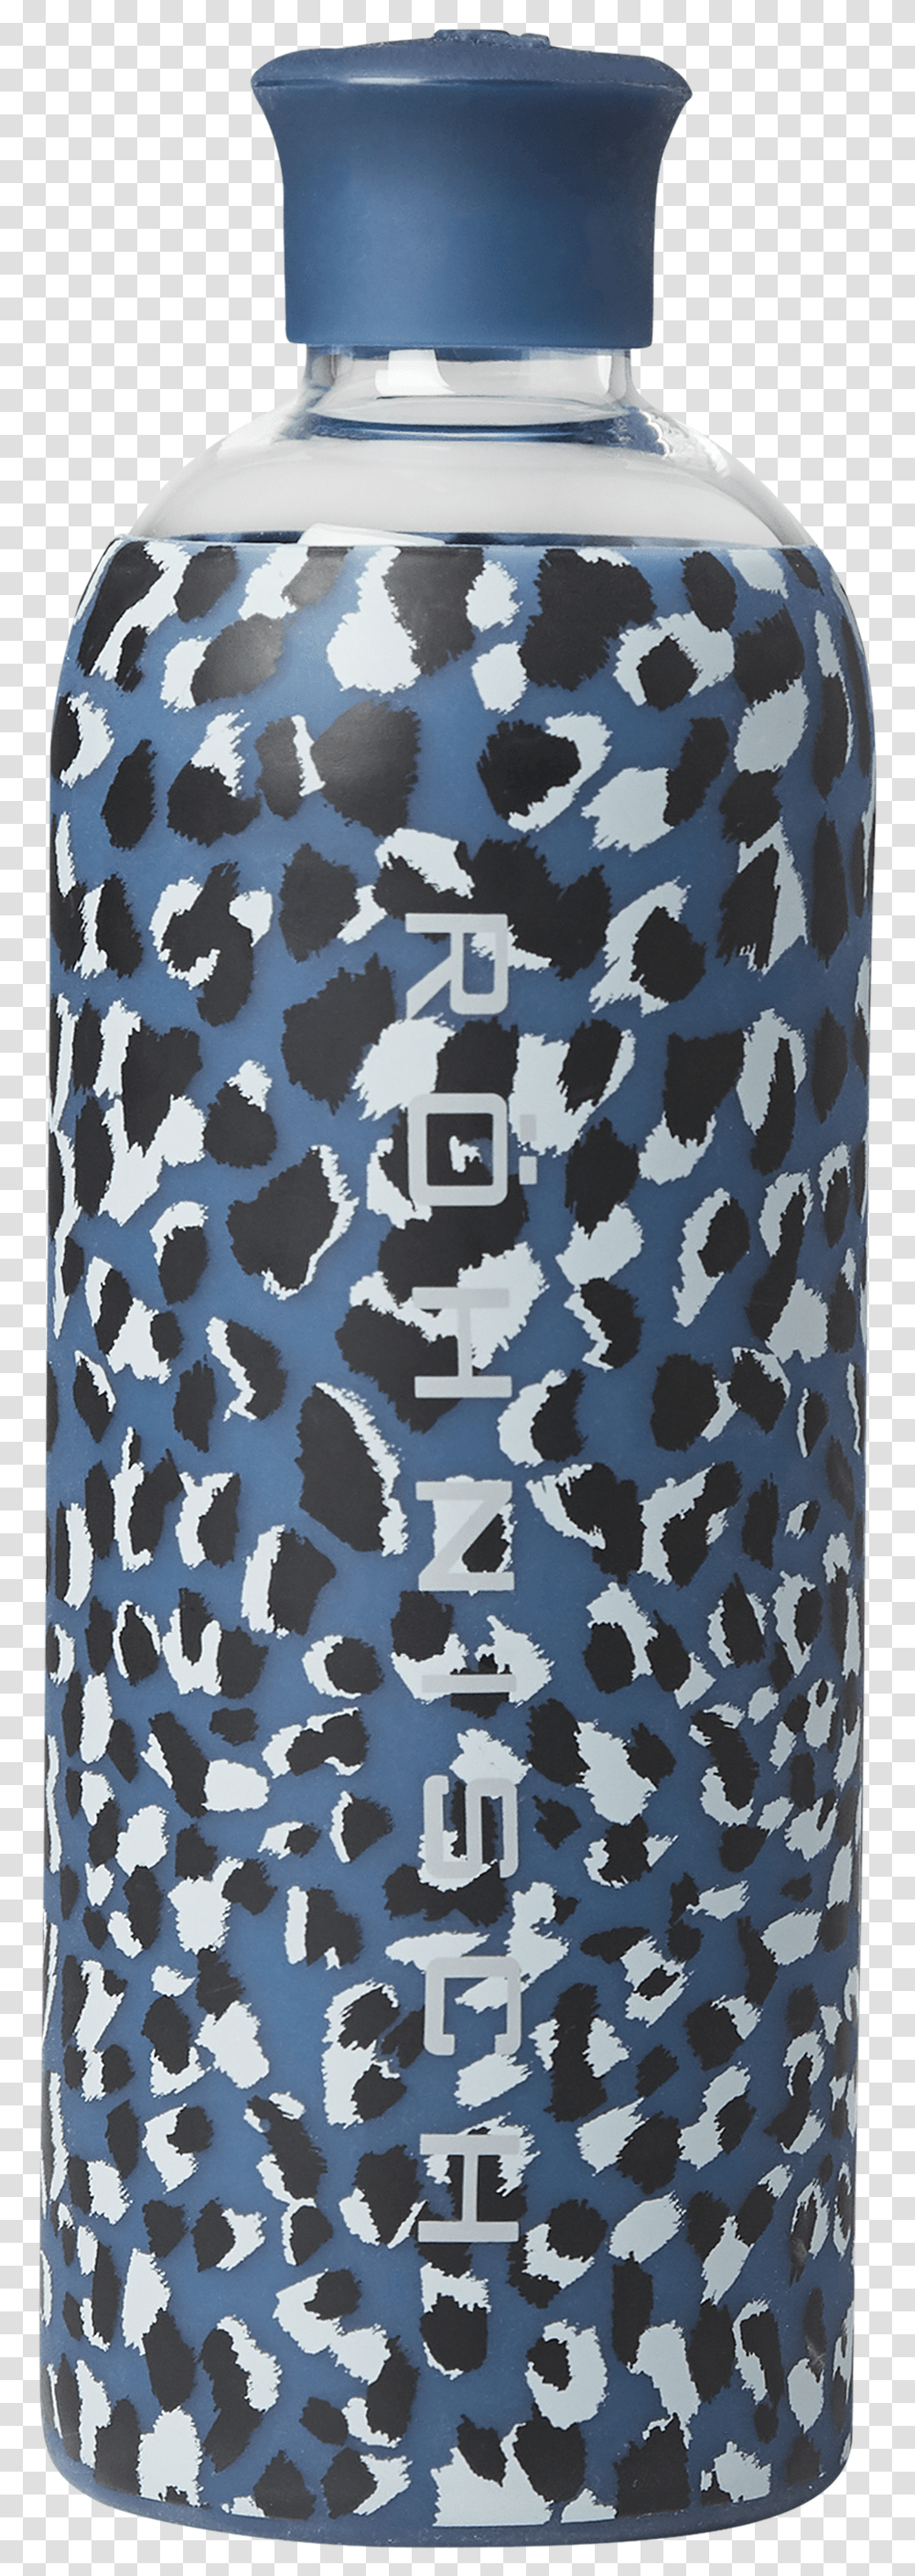 Glass Water Bottle Dusty Blue Spot, Military, Military Uniform, Camouflage, Rug Transparent Png